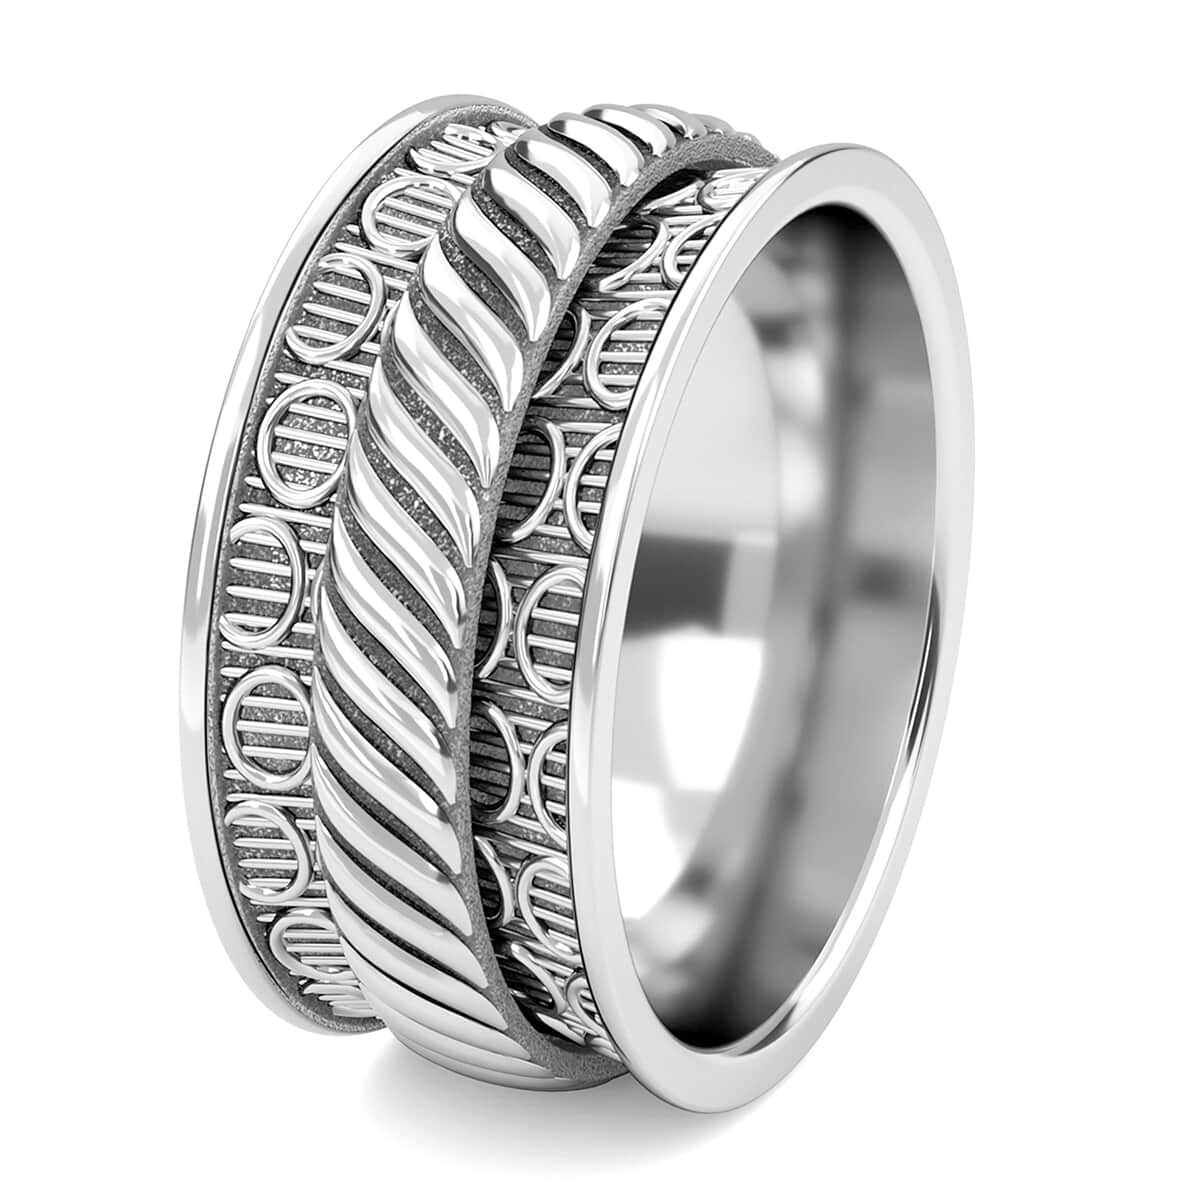 Sterling Silver Spinner Ring, Anxiety Ring for Women, Fidget Rings for Anxiety for Women, Stress Relieving Anxiety Ring (Size 7.0) (4.75 g) image number 5